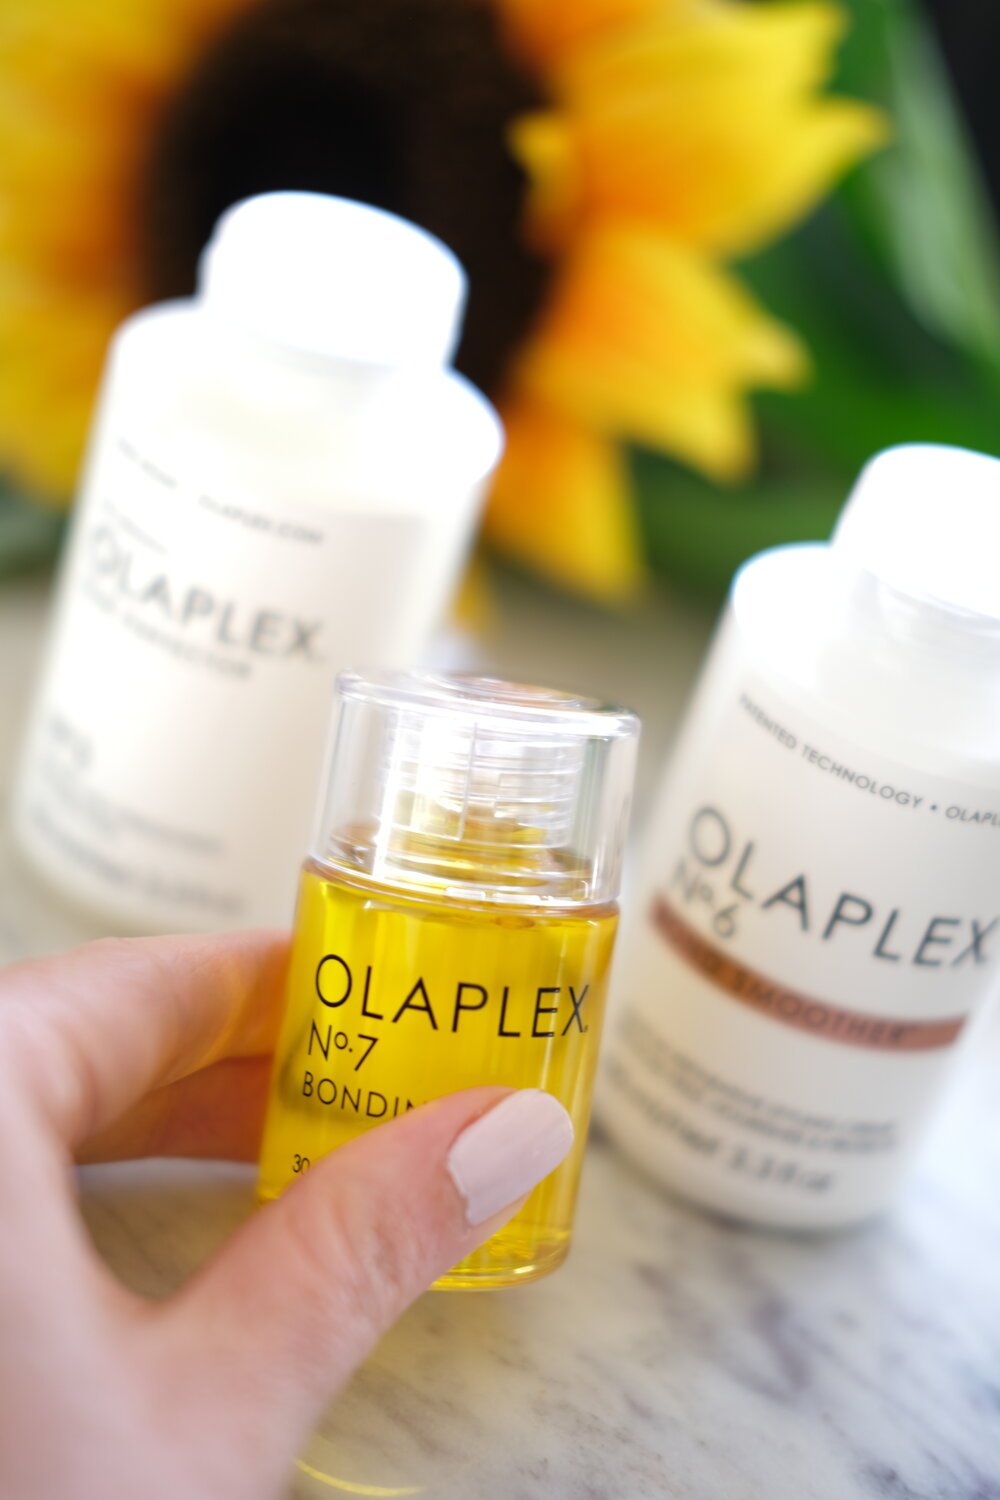 Find the best Olaplex Gift Set in 2022 with this Olaplex gift set guide. Usually once or twice per year, an Olaplex gift set pops up and it’s best to run to buy the Olaplex kits as they sell out so fast. The Sephora olaplex gift set sells out incredi